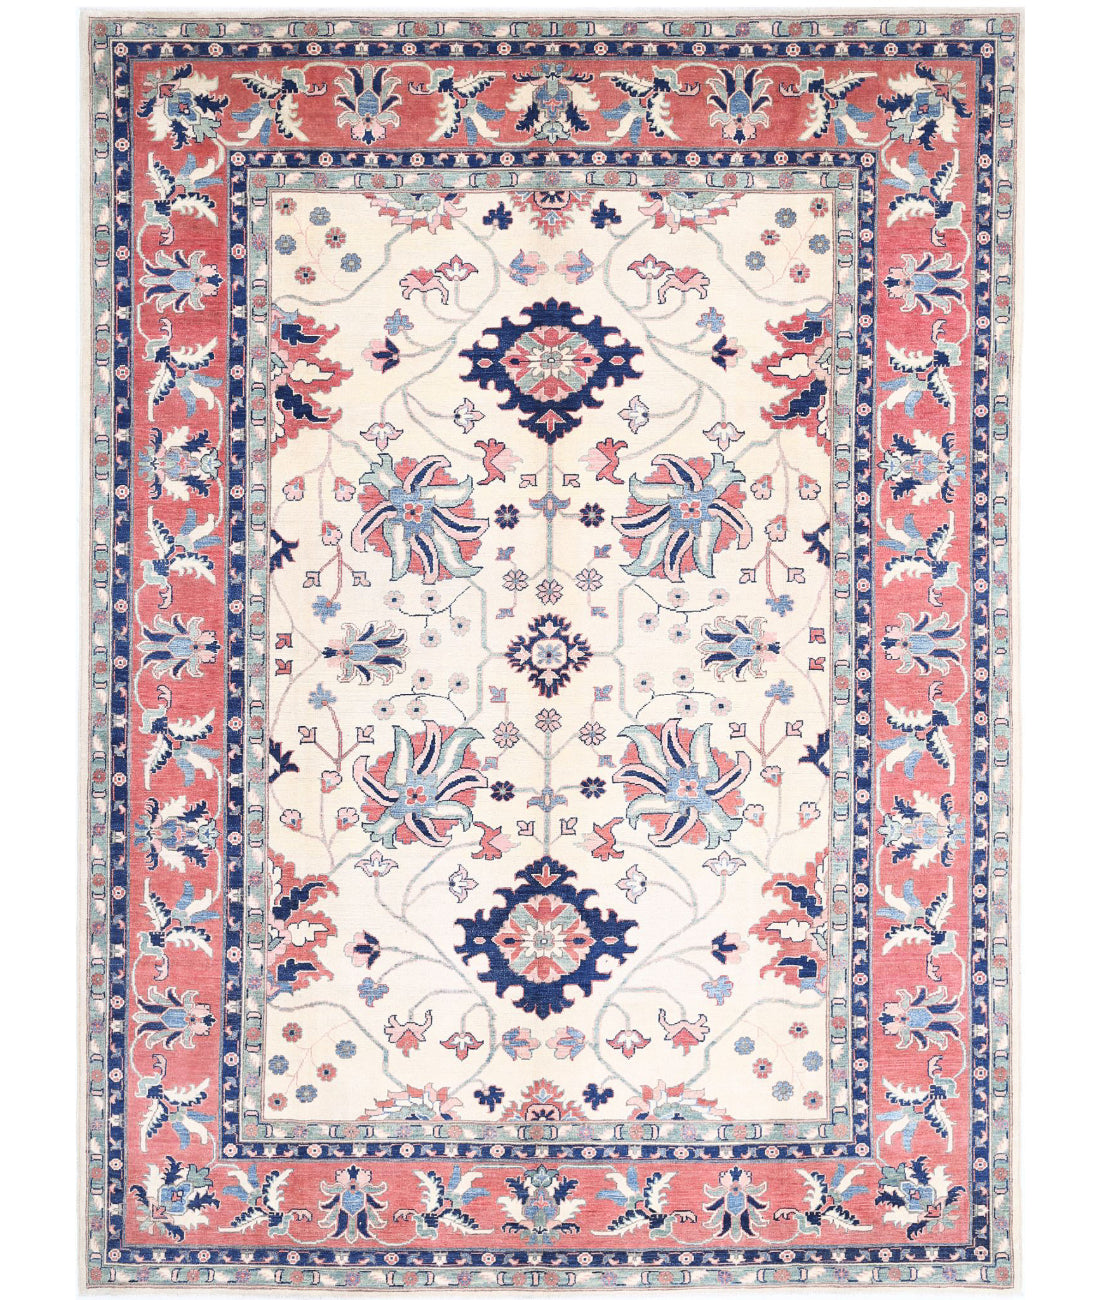 Hand Knotted Tribal Kazak Wool Rug - 8'6'' x 11'8'' 8'6'' x 11'8'' (255 X 350) / Ivory / Red